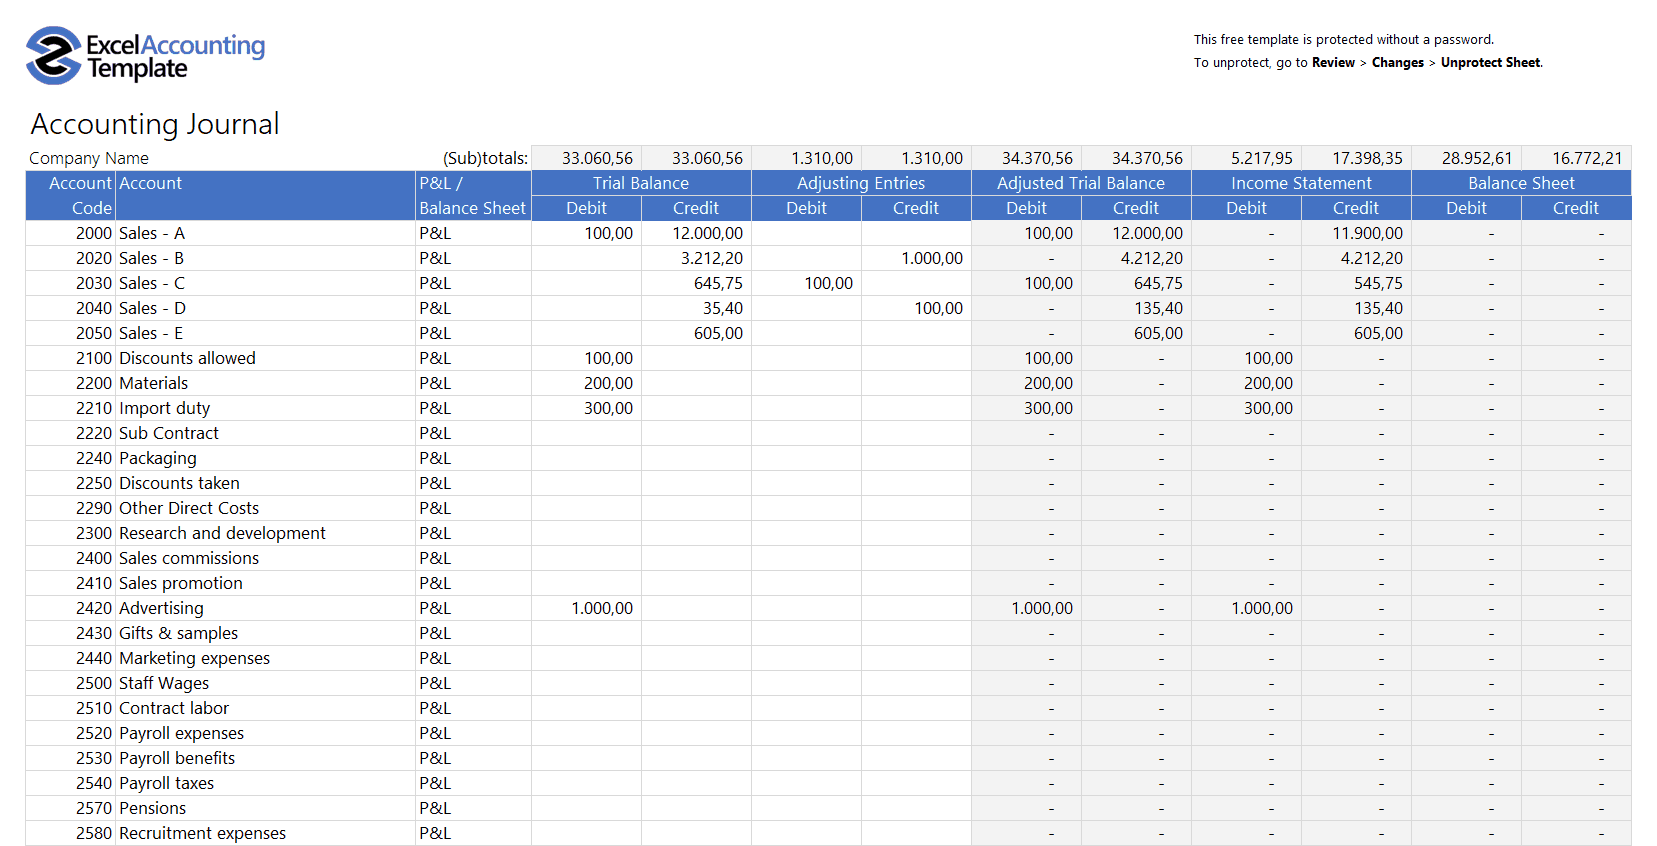 Free Accounting Templates in Excel - download for your business